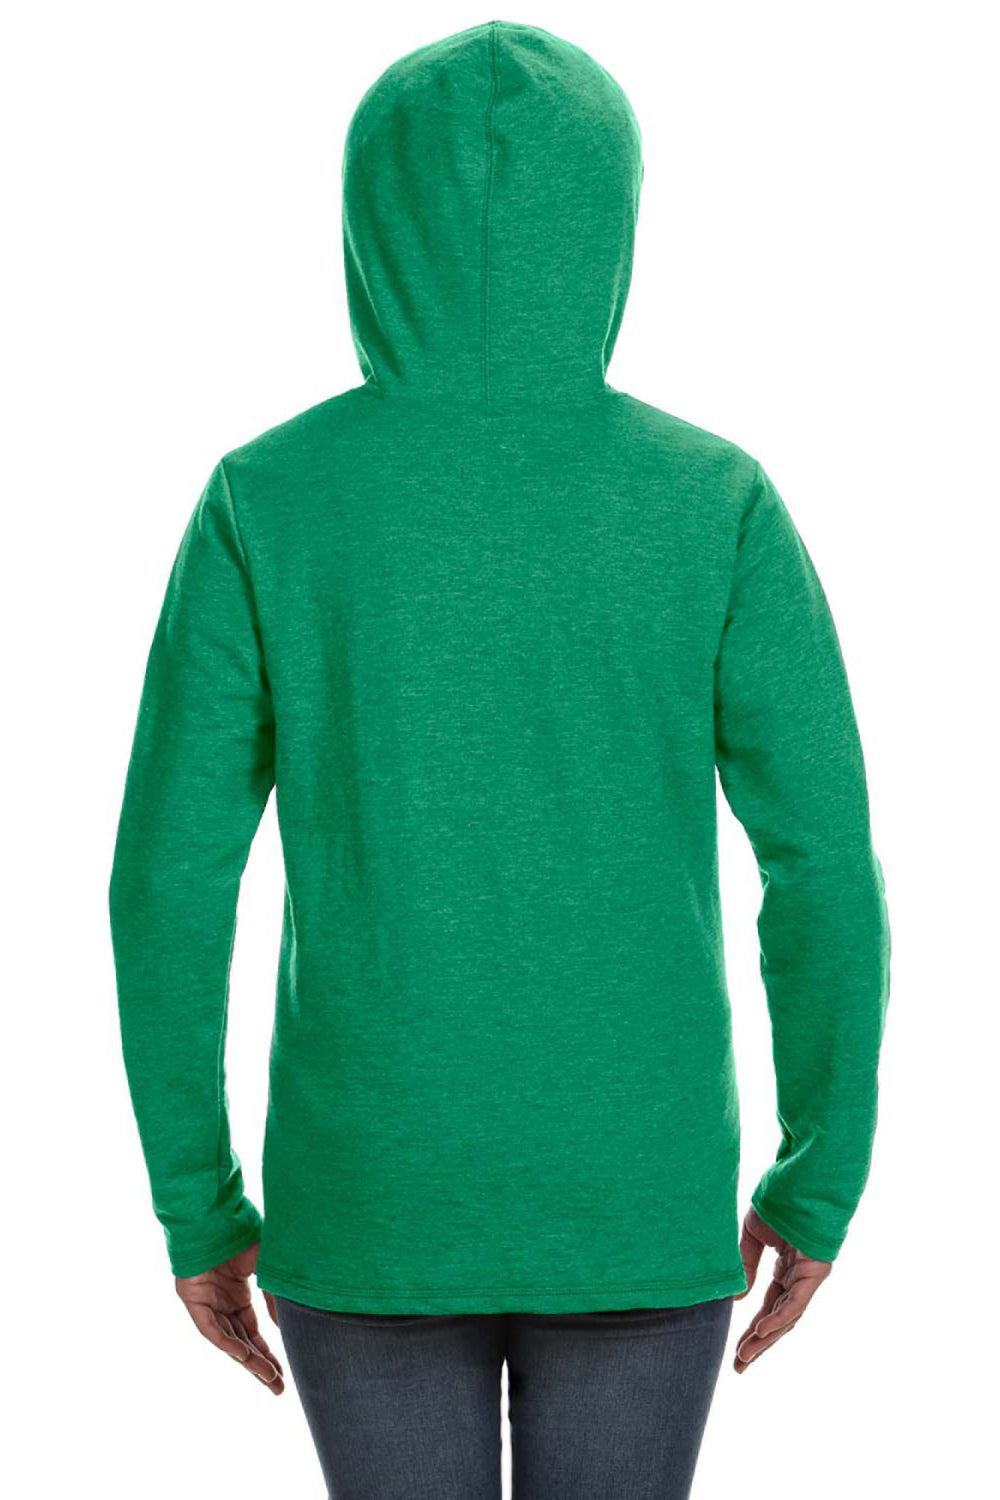 Anvil 72500L Womens French Terry Hooded Sweatshirt Hoodie Heather Green Back